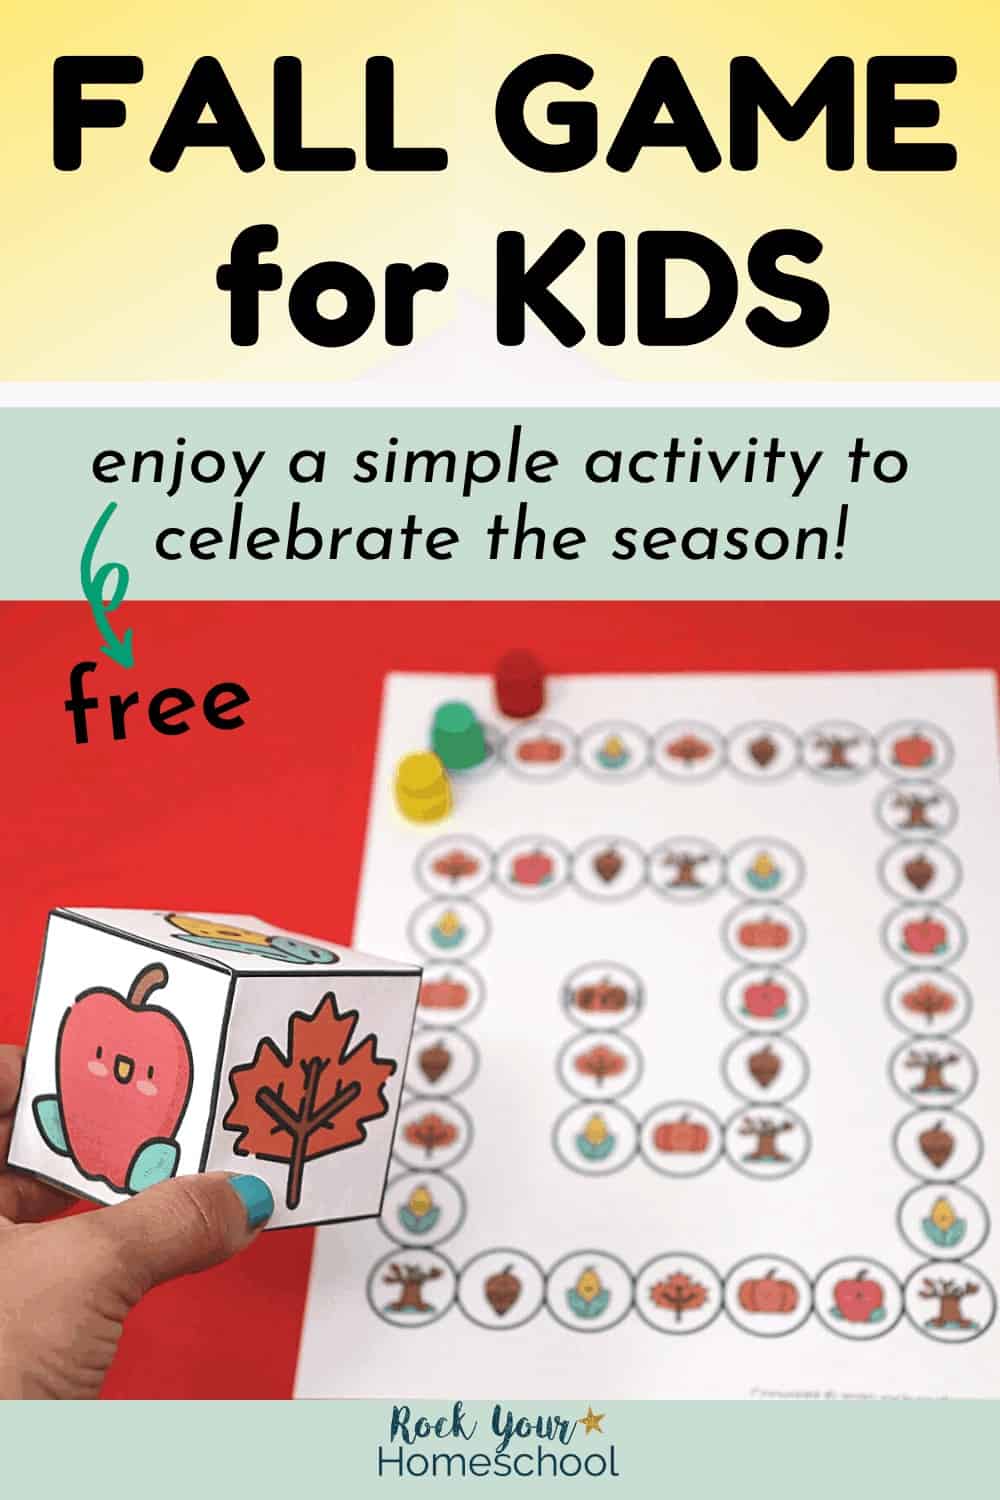 Enjoy a Simple Activity with this Free Fall Game for Kids